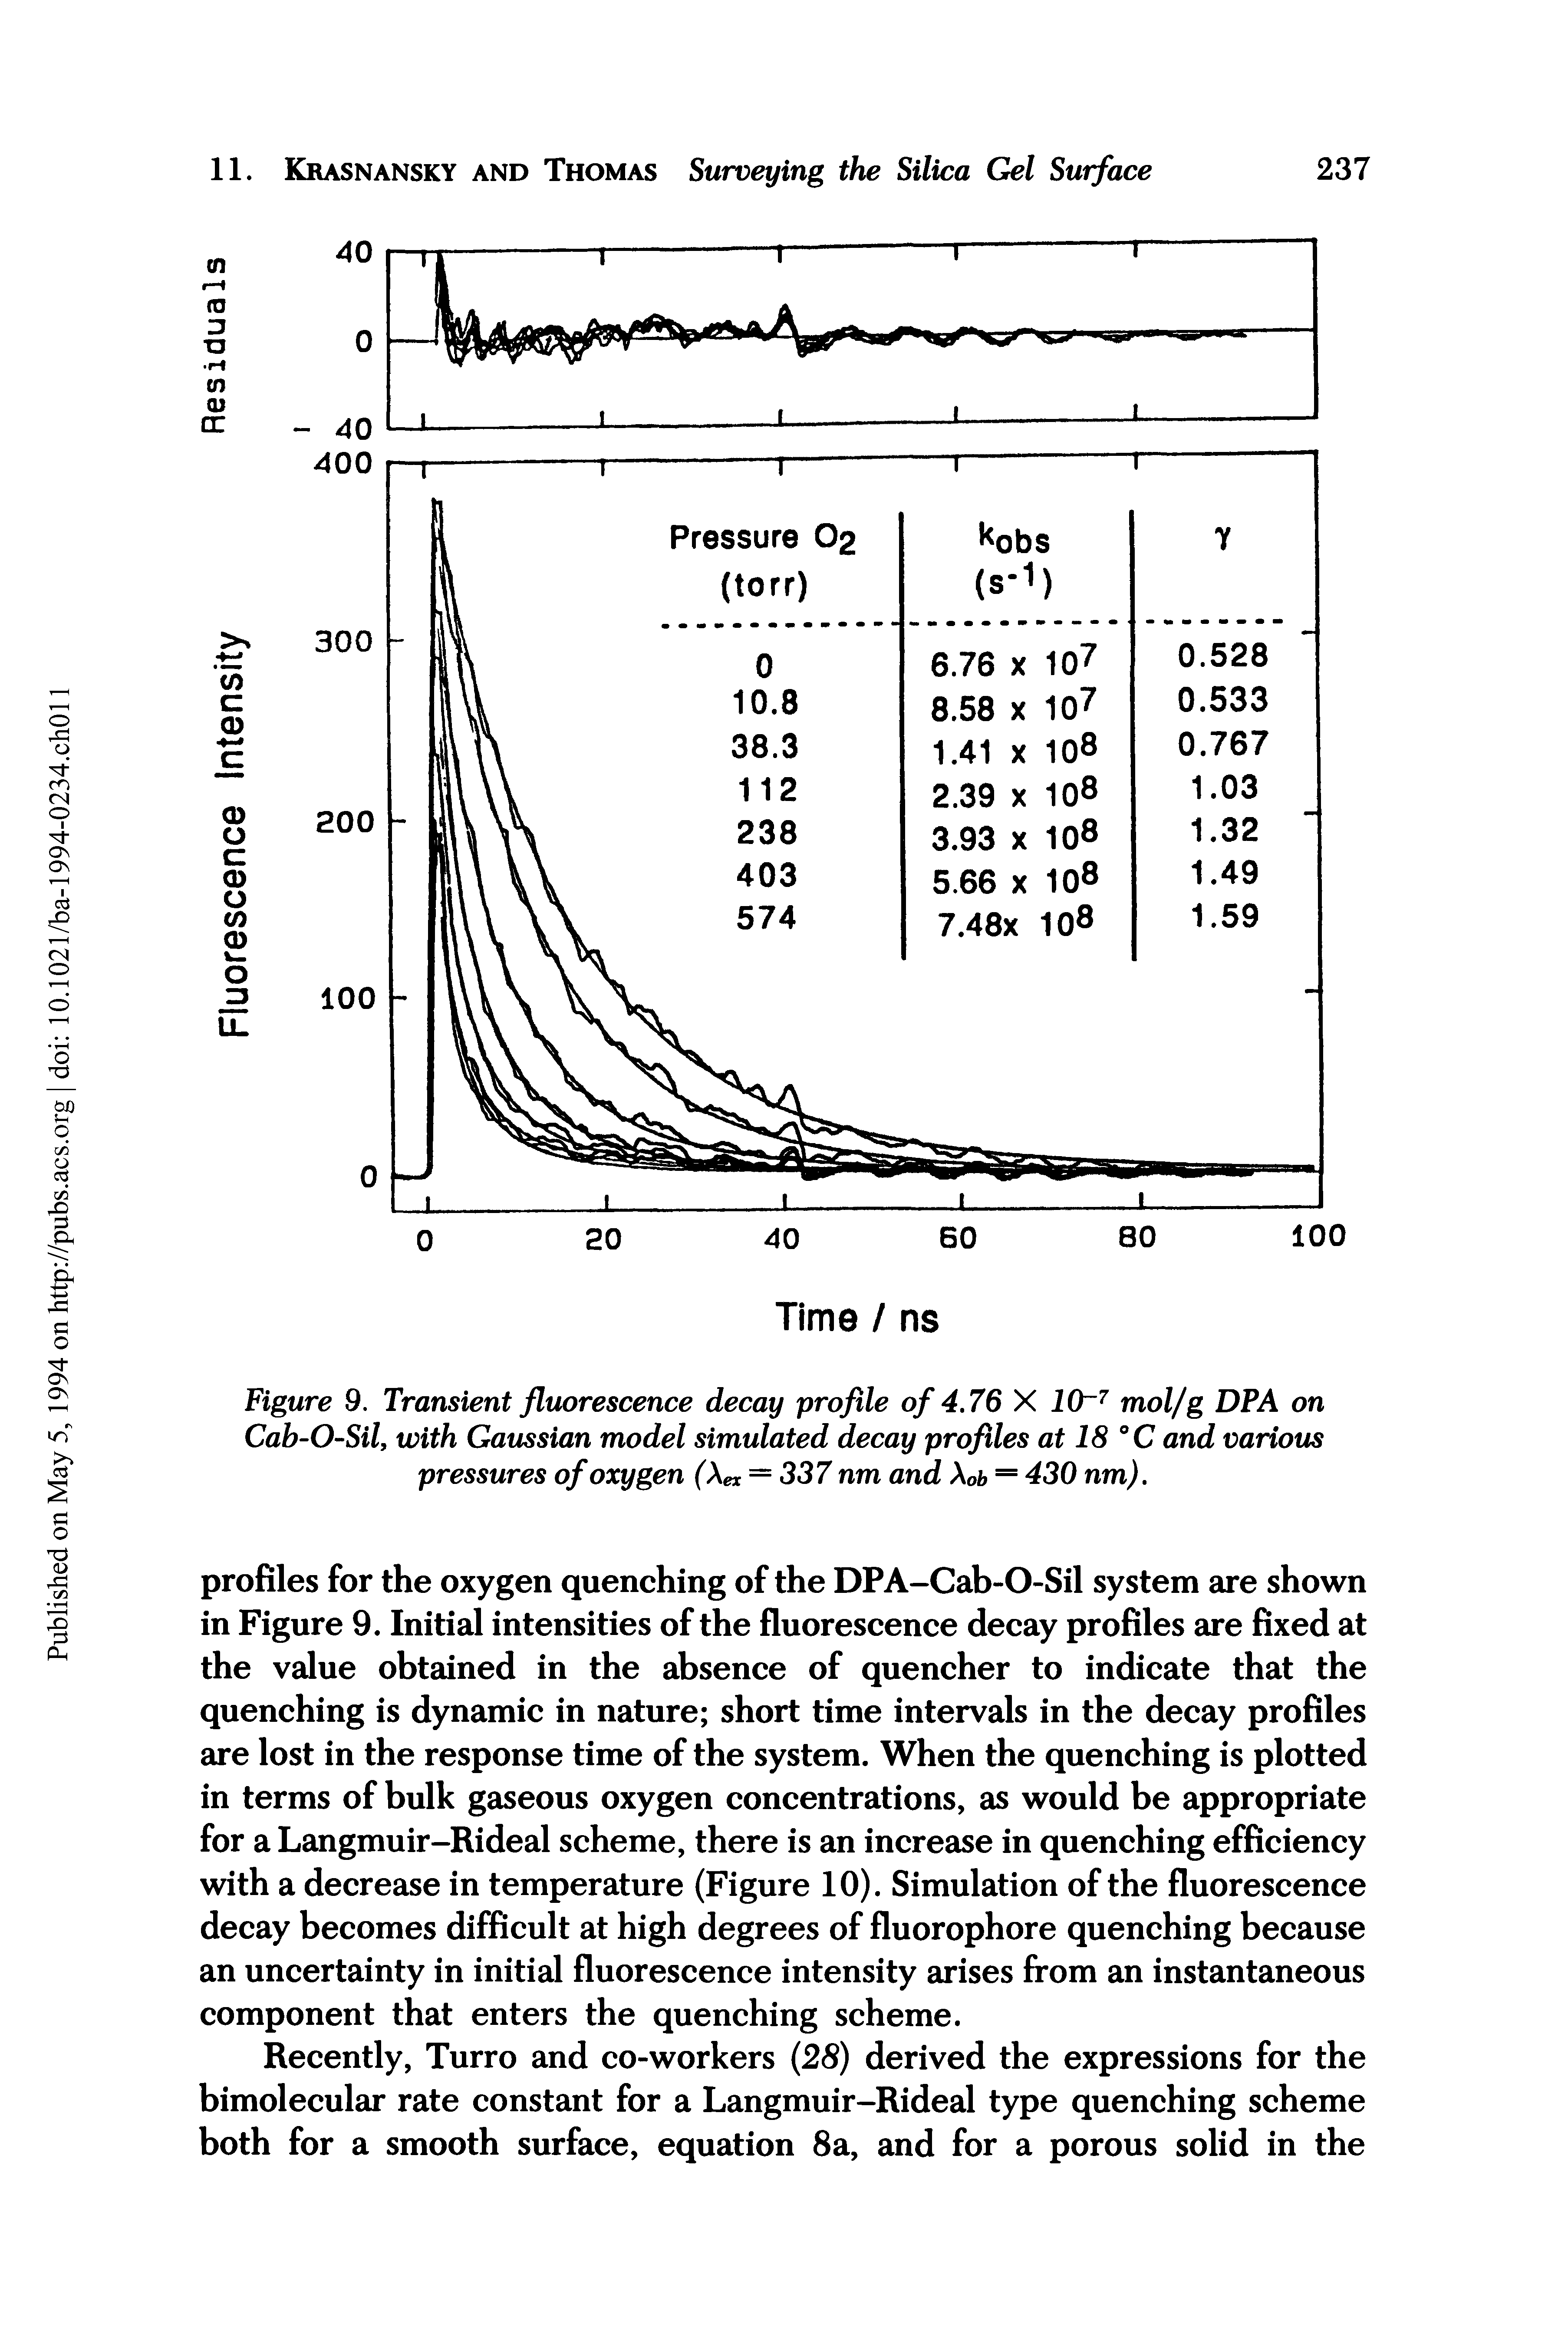 Figure 9. Transient fluorescence decay profile of 4.76 X 10 7 mol/g DP A on Cab-O-Sil, with Gaussian model simulated decay profiles at 18 °C and various pressures of oxygen ( ex = 337 nm and Xob = 430 nm).